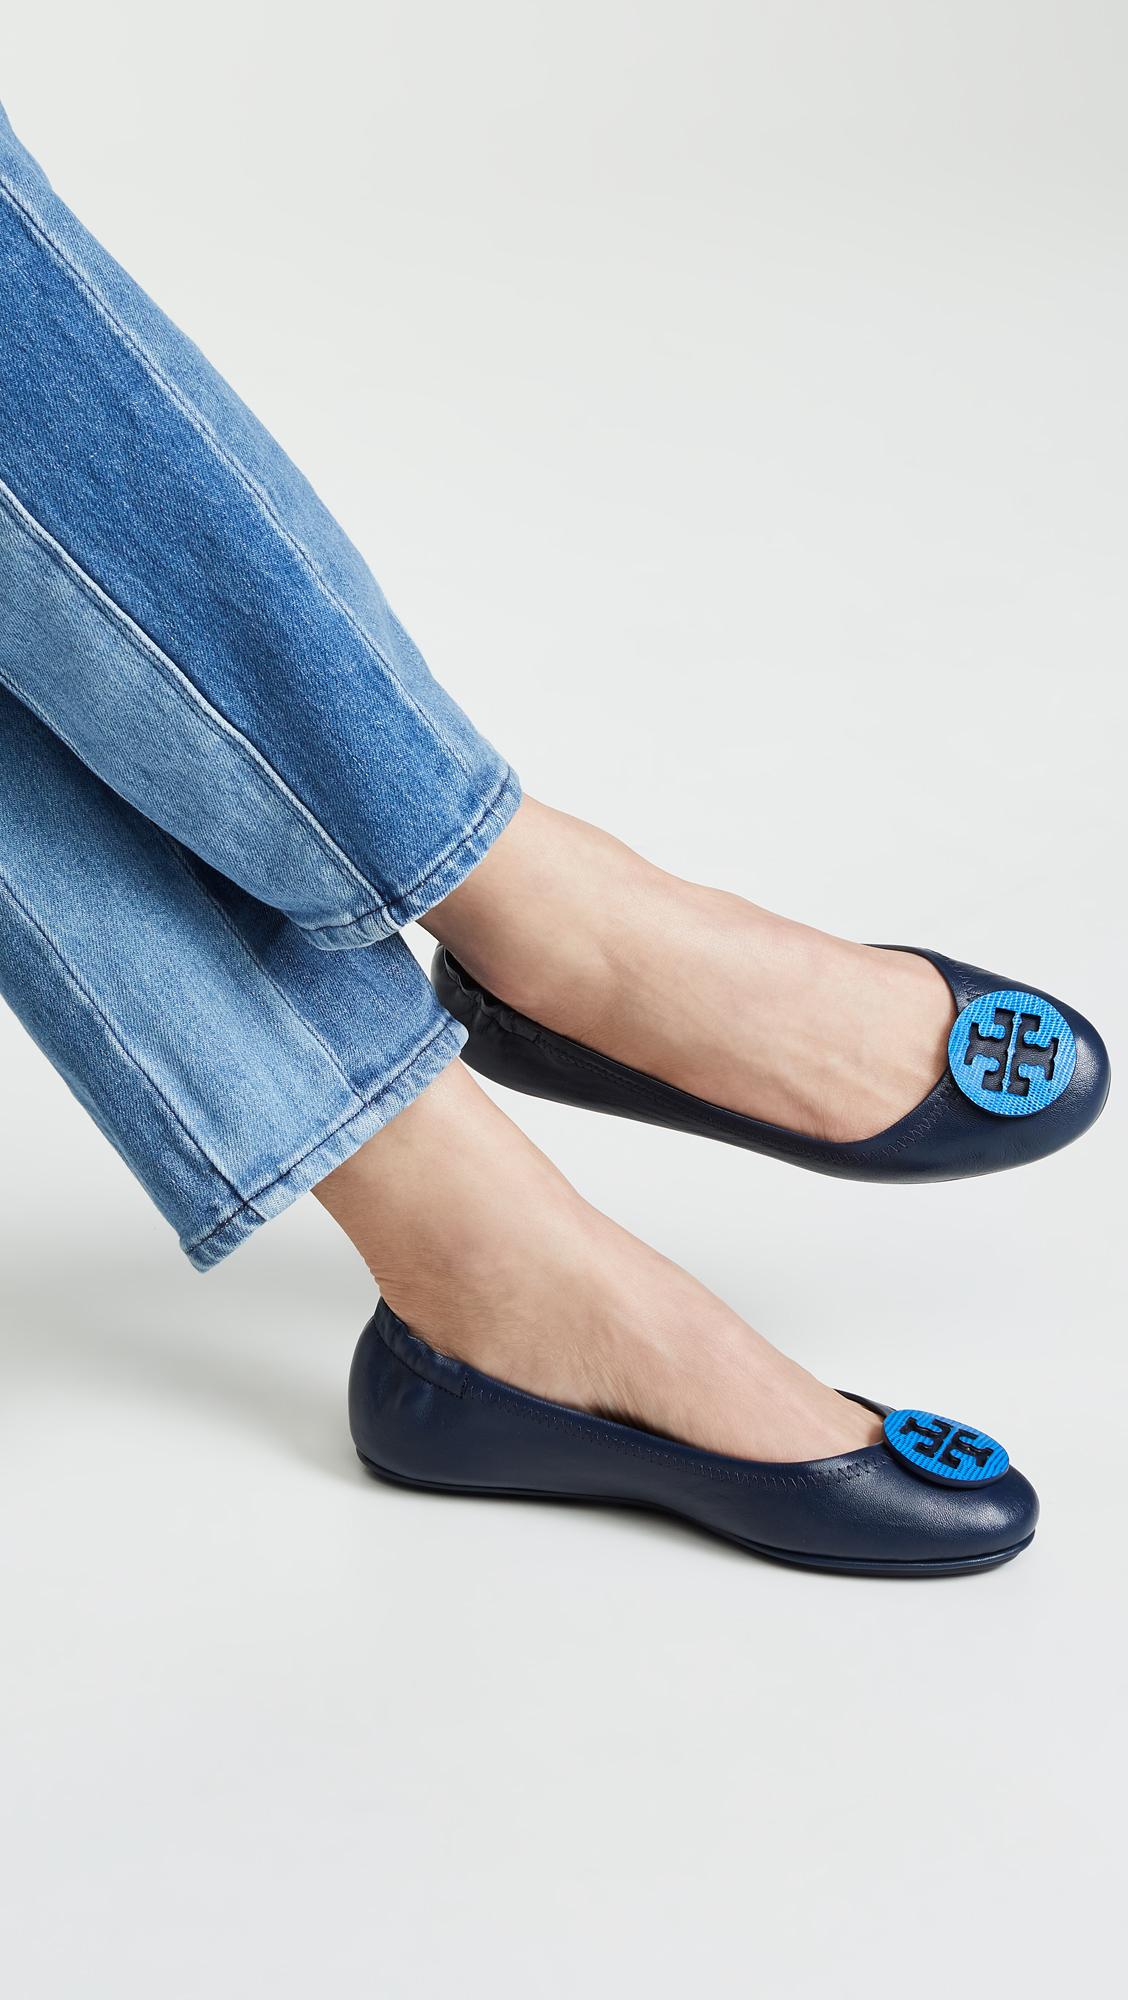 Tory Burch Travel Minnie Flats Online Hotsell, UP TO 51% OFF